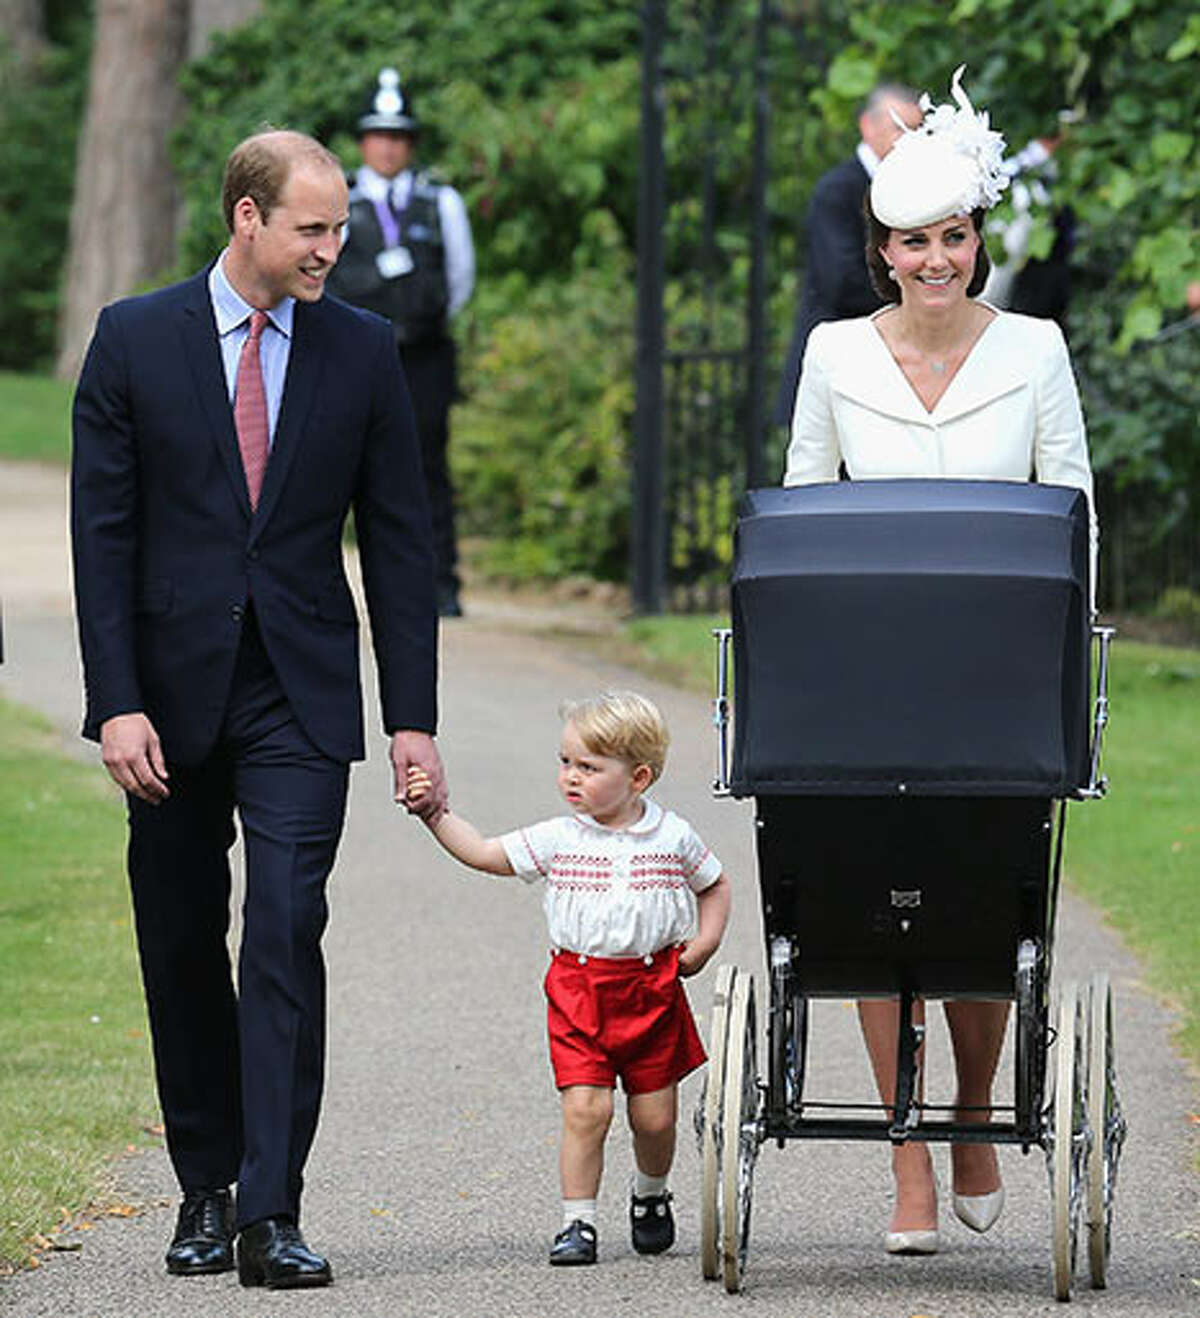 Keep clicking for more photos of Kate, Will and the royal gang.